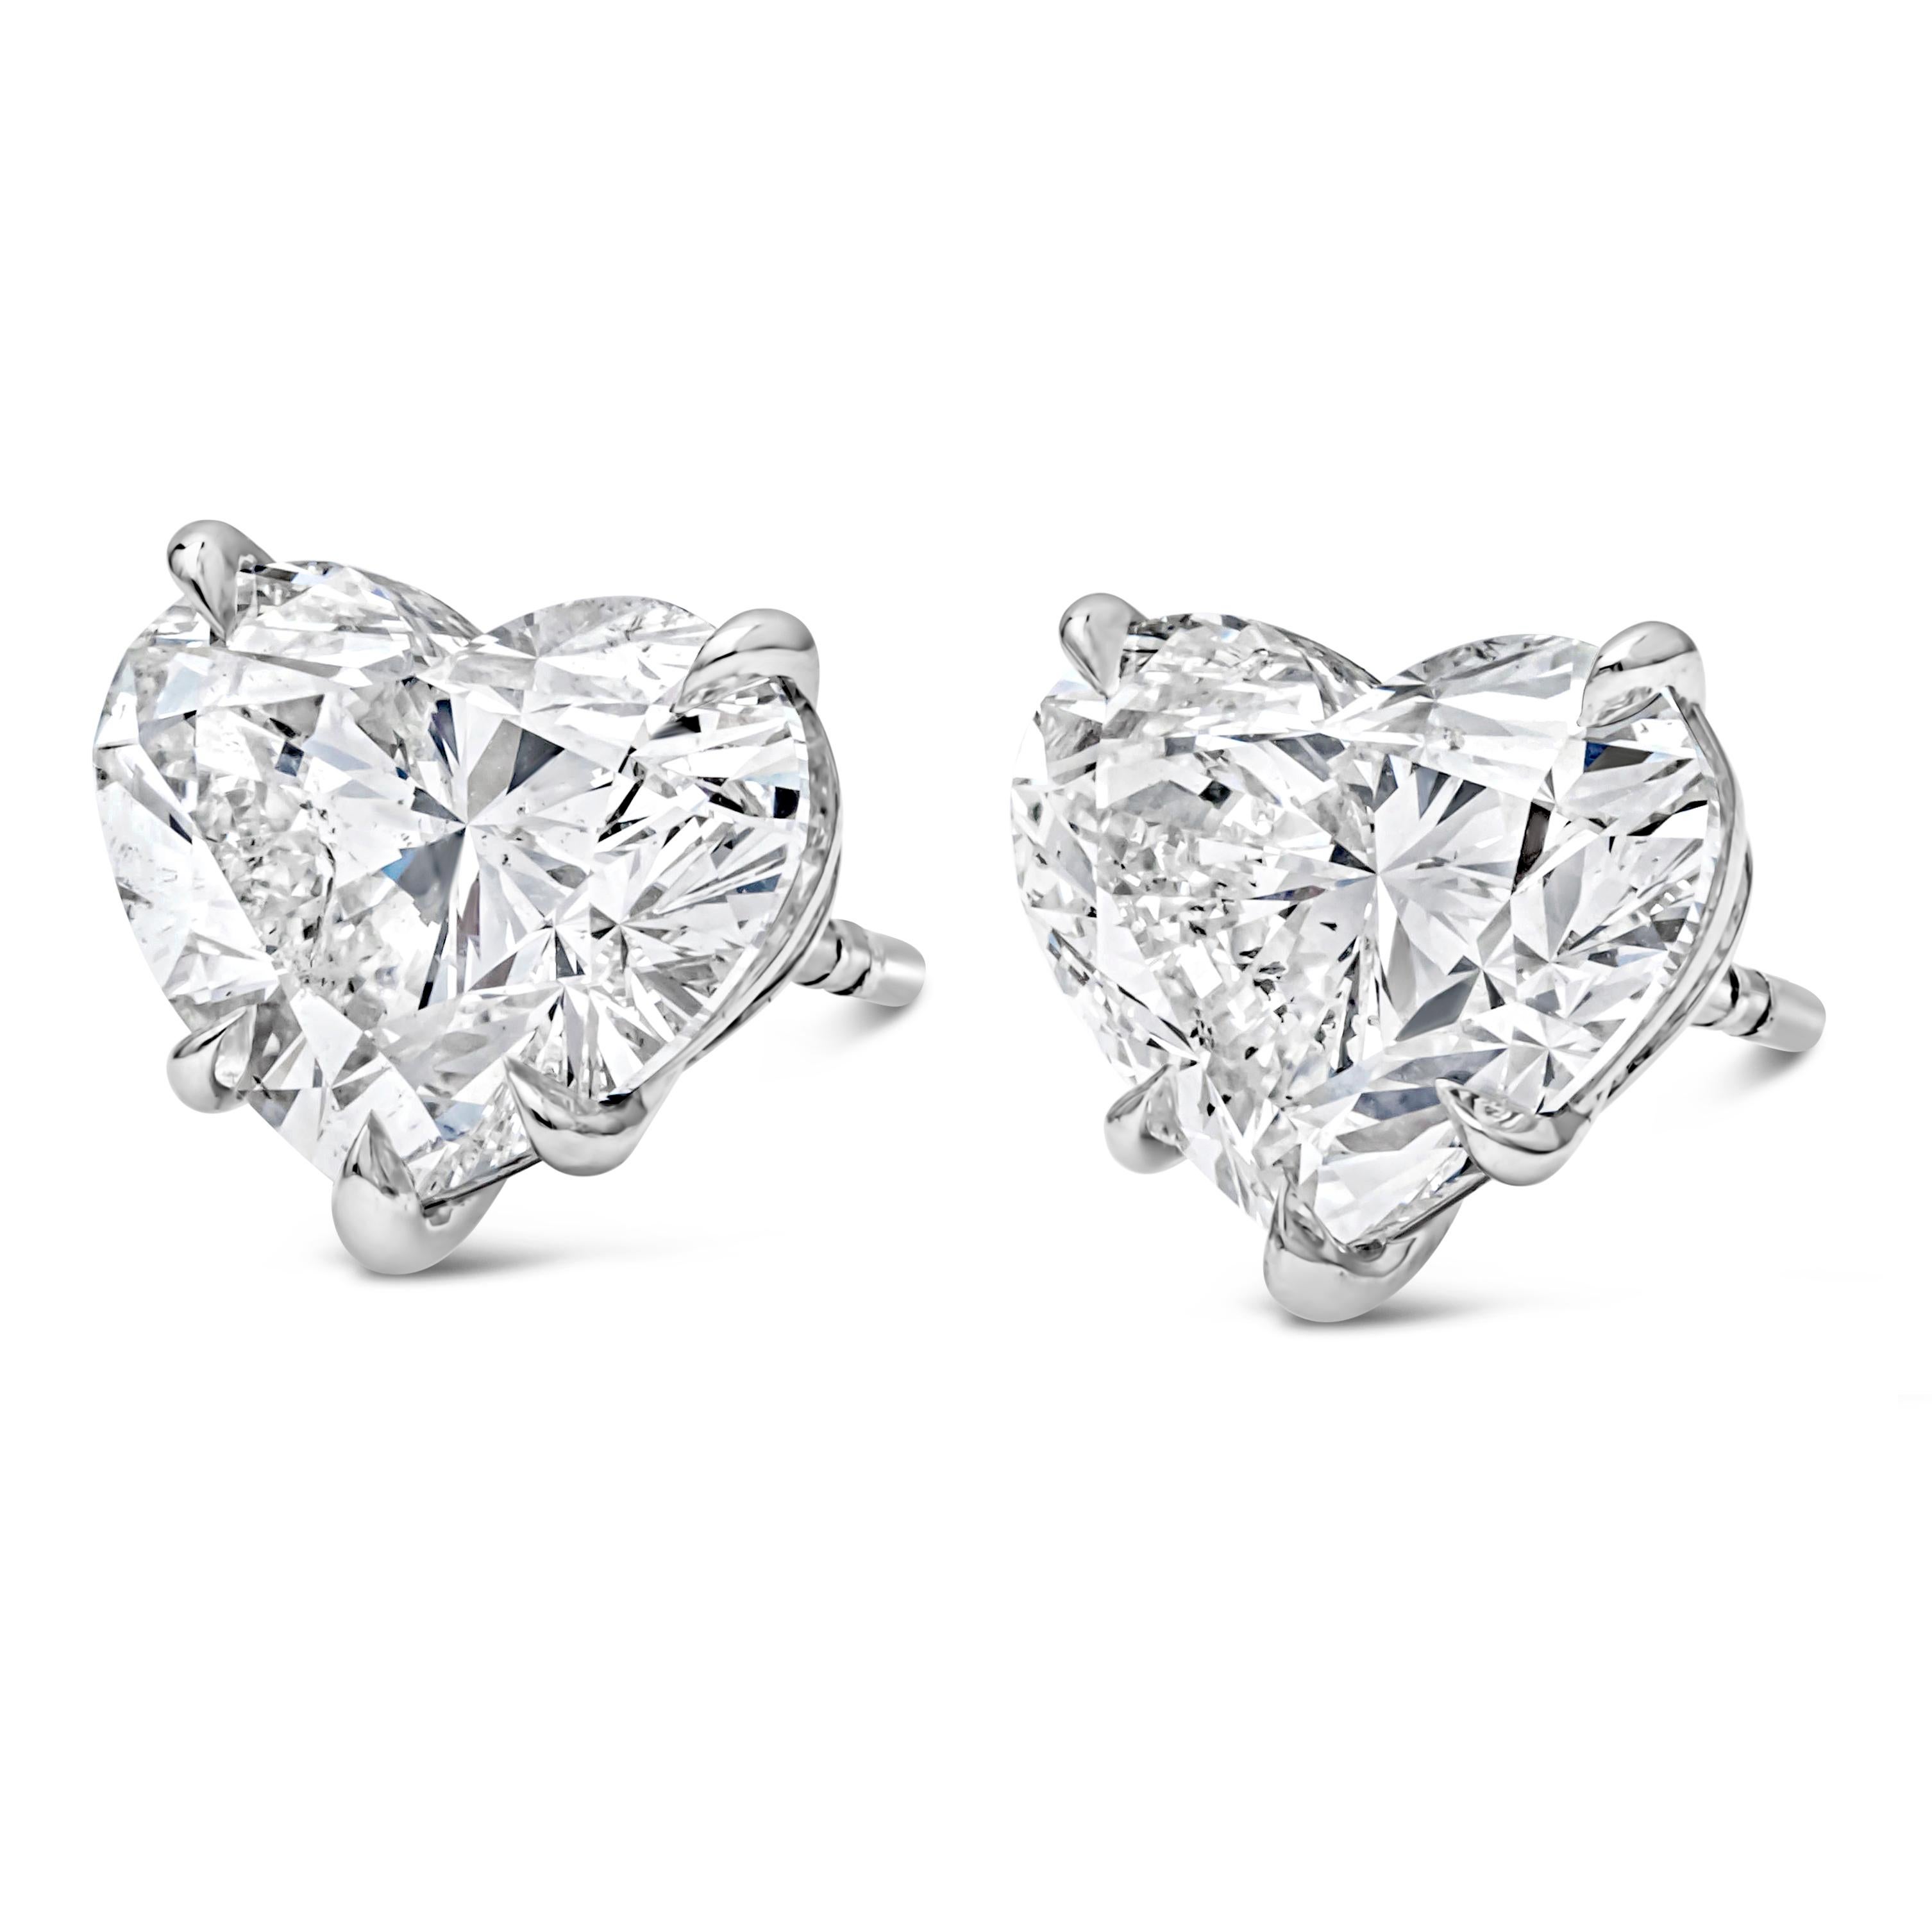 Classic pair of stud earrings showcasing two GIA Certified brilliant heart shape diamonds, each weighing 3.01 carats and 3.02 carats, H-I Color and SI2 in Clarity respectively. Mounted in a timeless five-prong basket setting and Finely made in